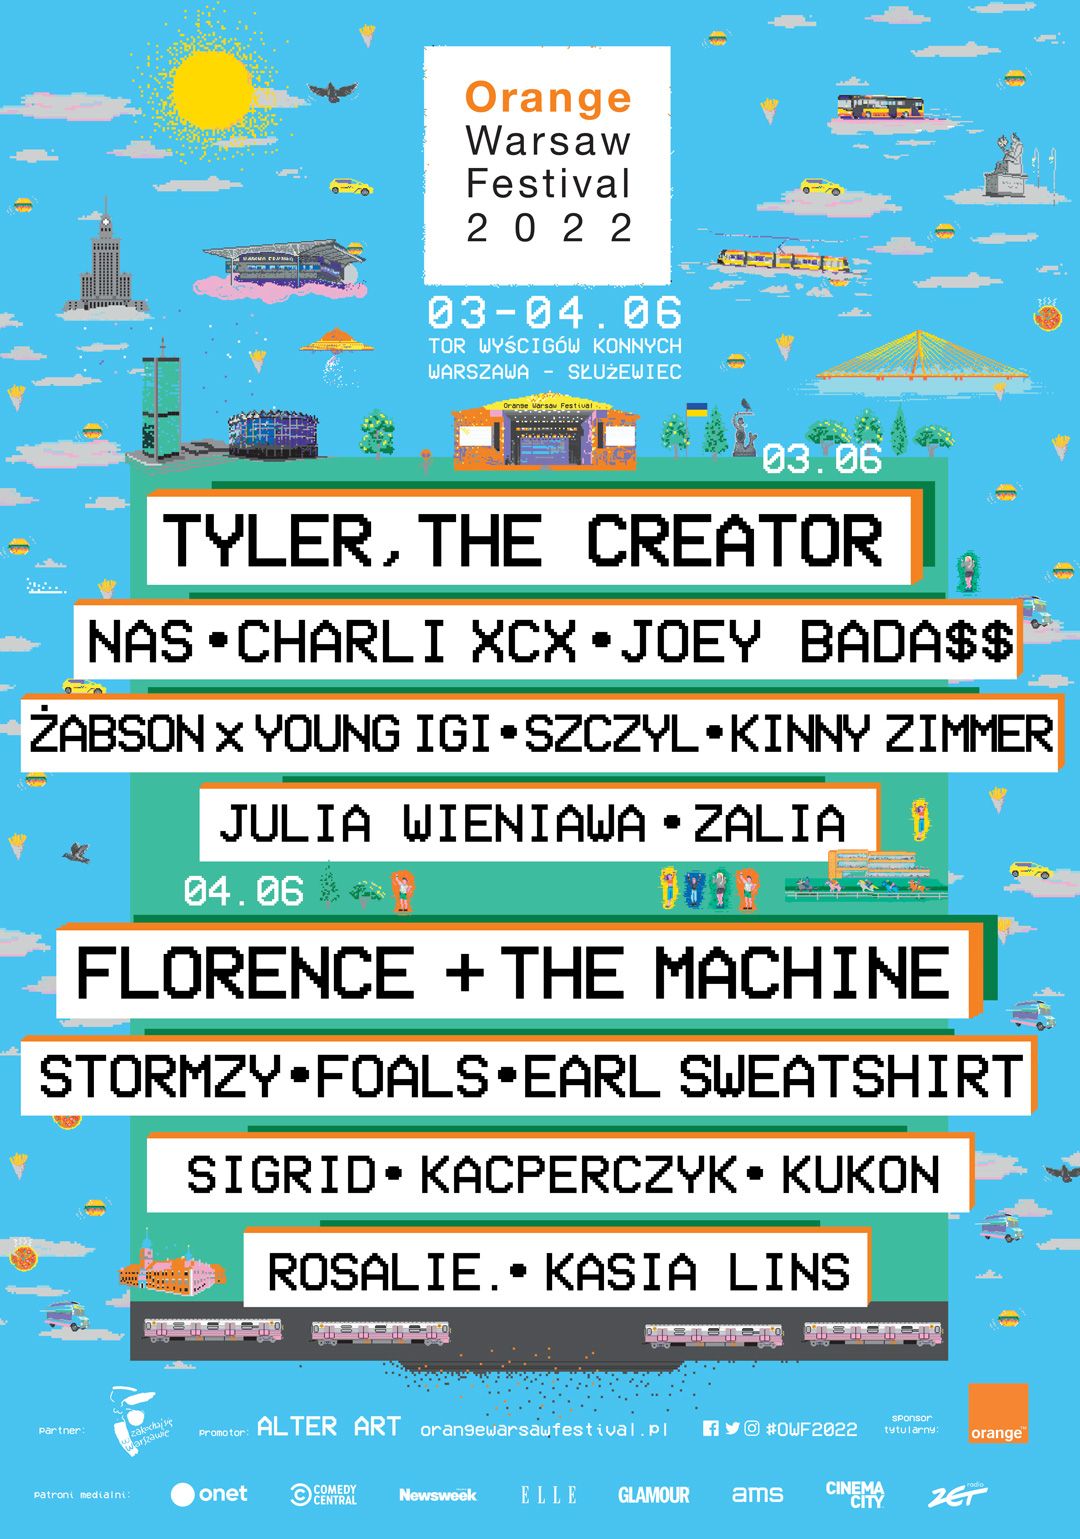 2022 line-up: Tyler, The Creator, Florence and the Machine, Charli XCX, Stormzy, Sigrid, Nas and more